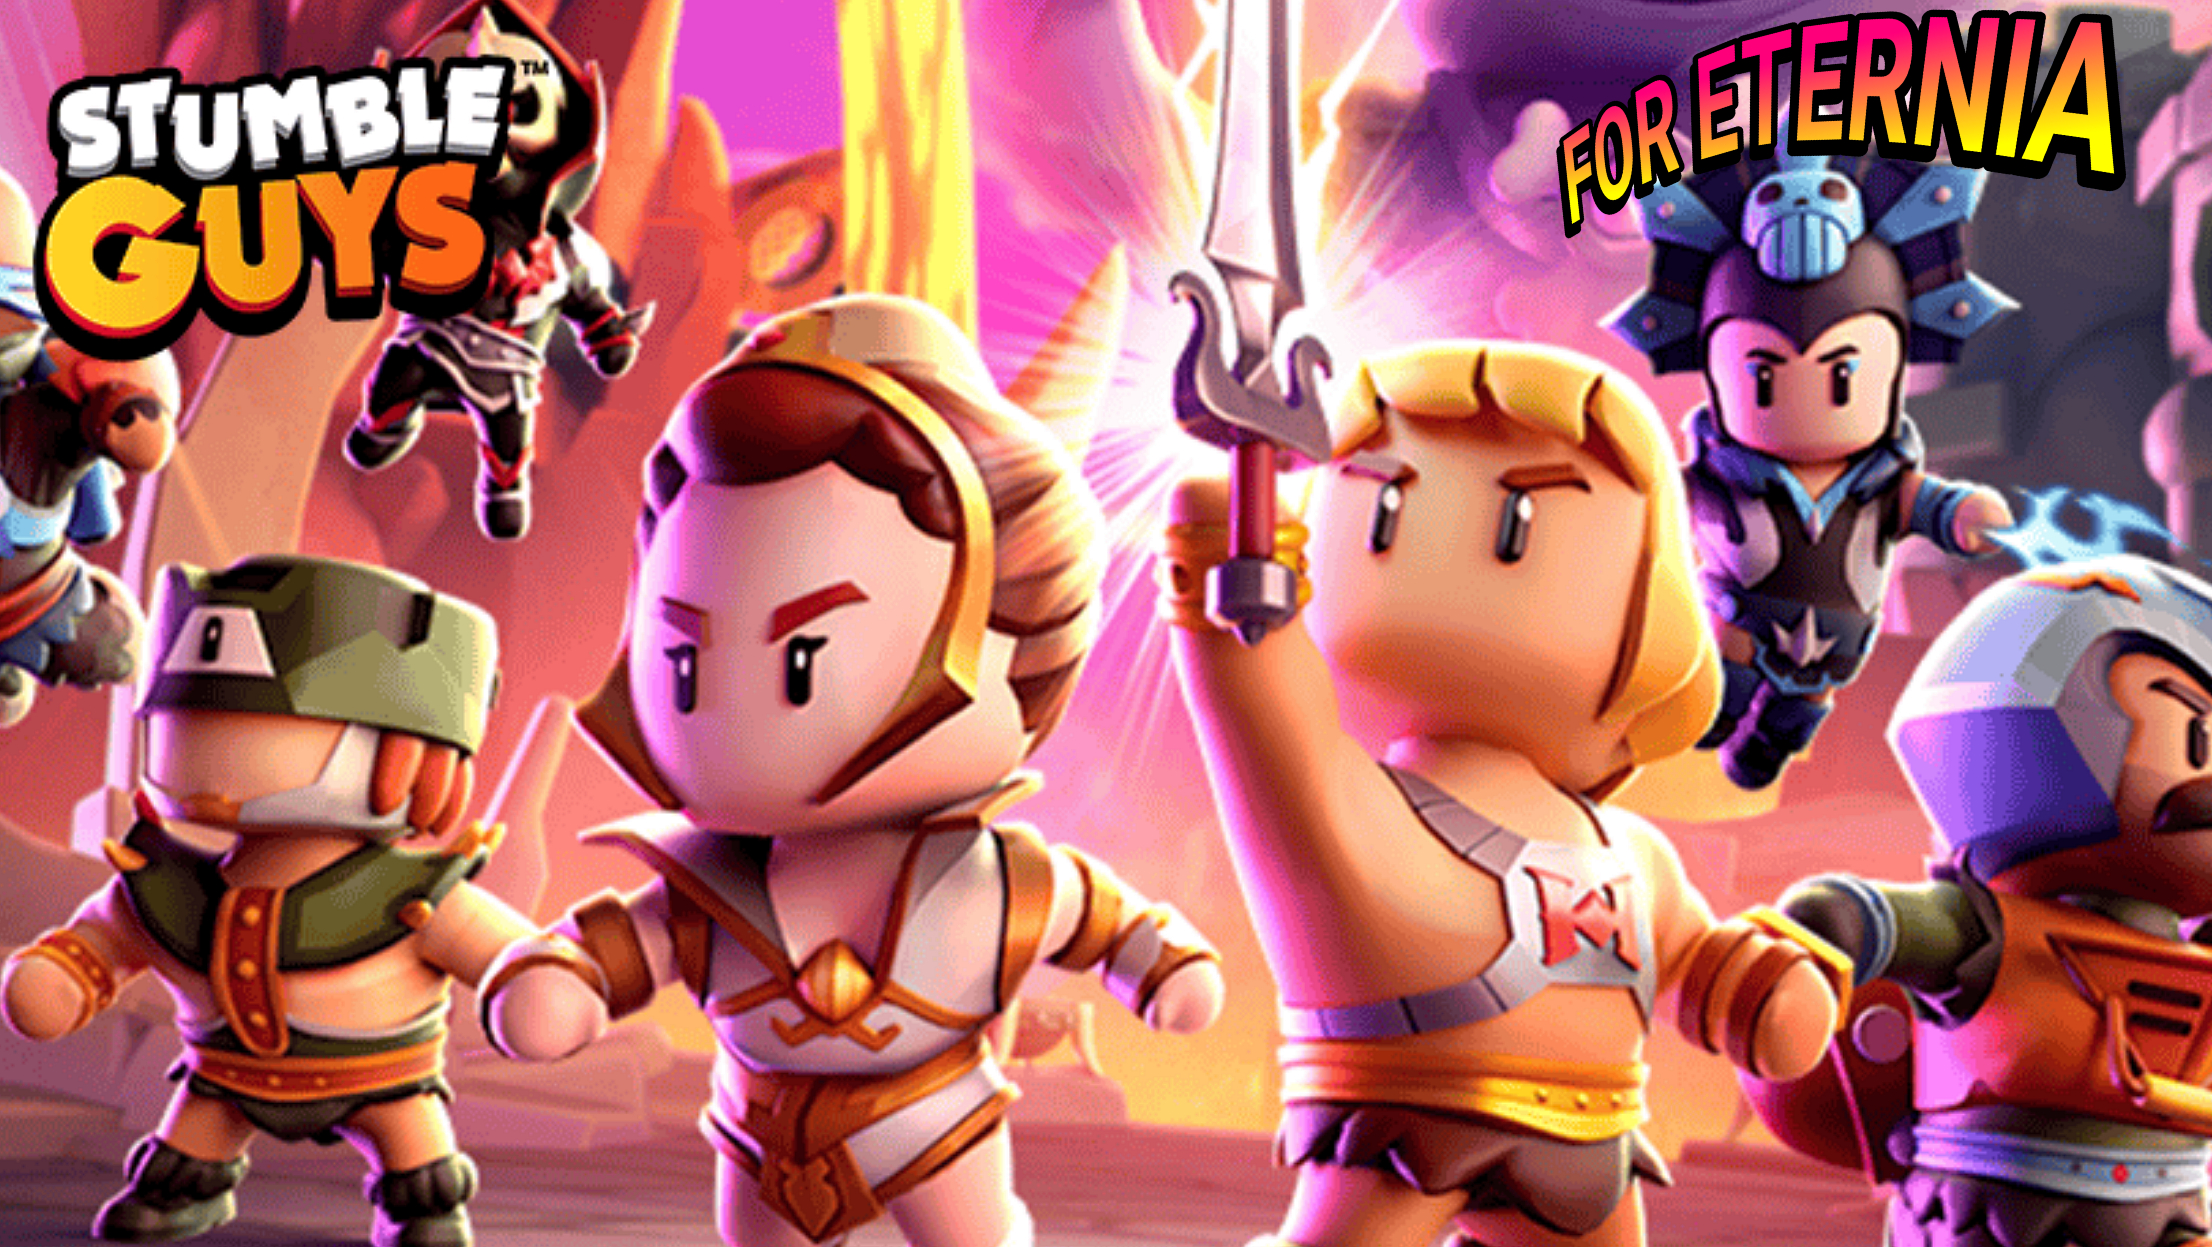 ”Stumble Guys” video game reveals Masters of the Universe collaboration